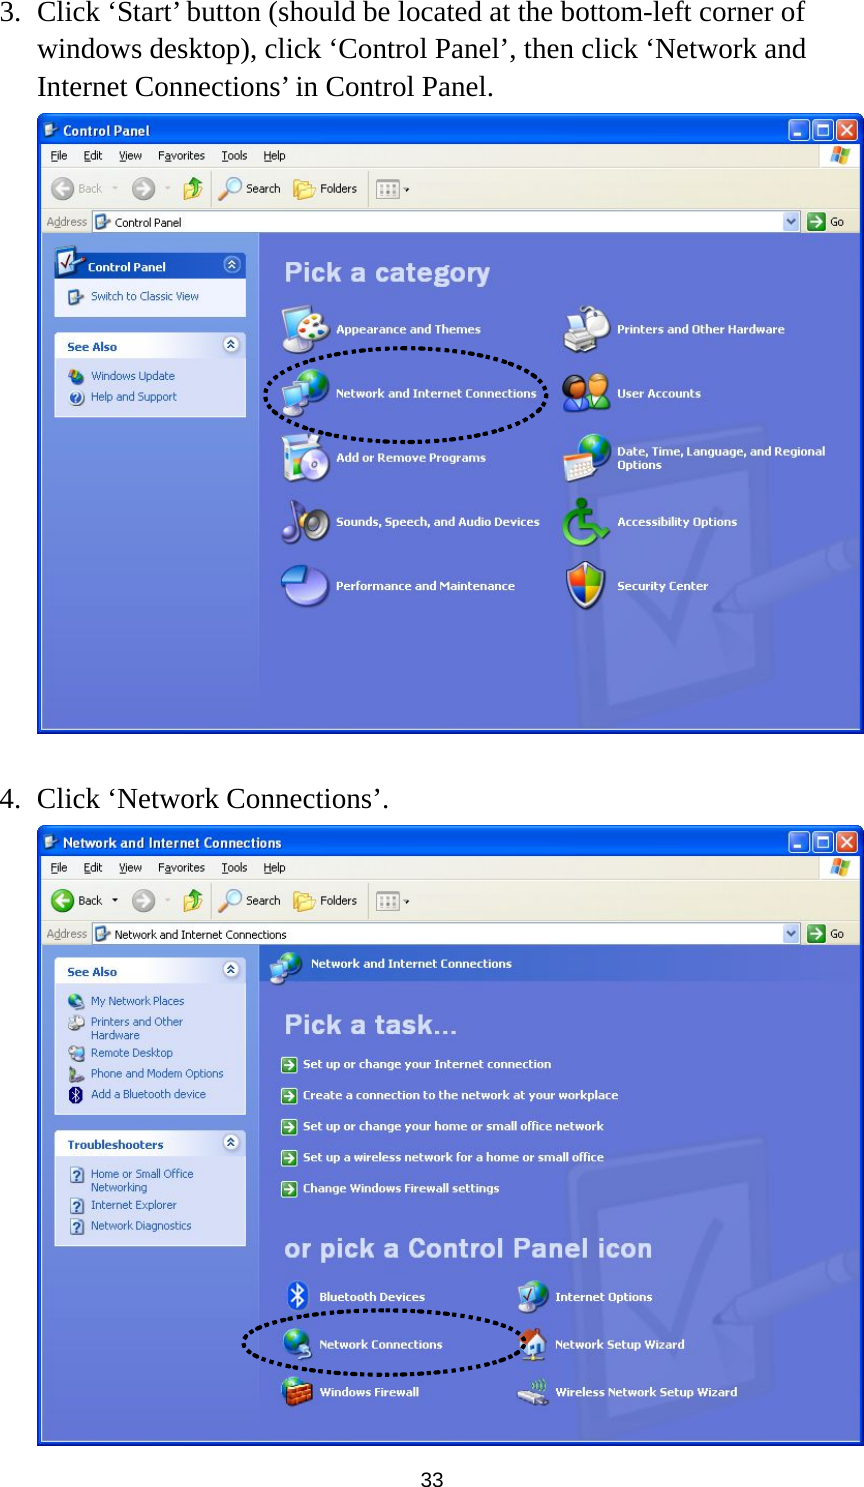  33 3. Click ‘Start’ button (should be located at the bottom-left corner of windows desktop), click ‘Control Panel’, then click ‘Network and Internet Connections’ in Control Panel.   4. Click ‘Network Connections’.  